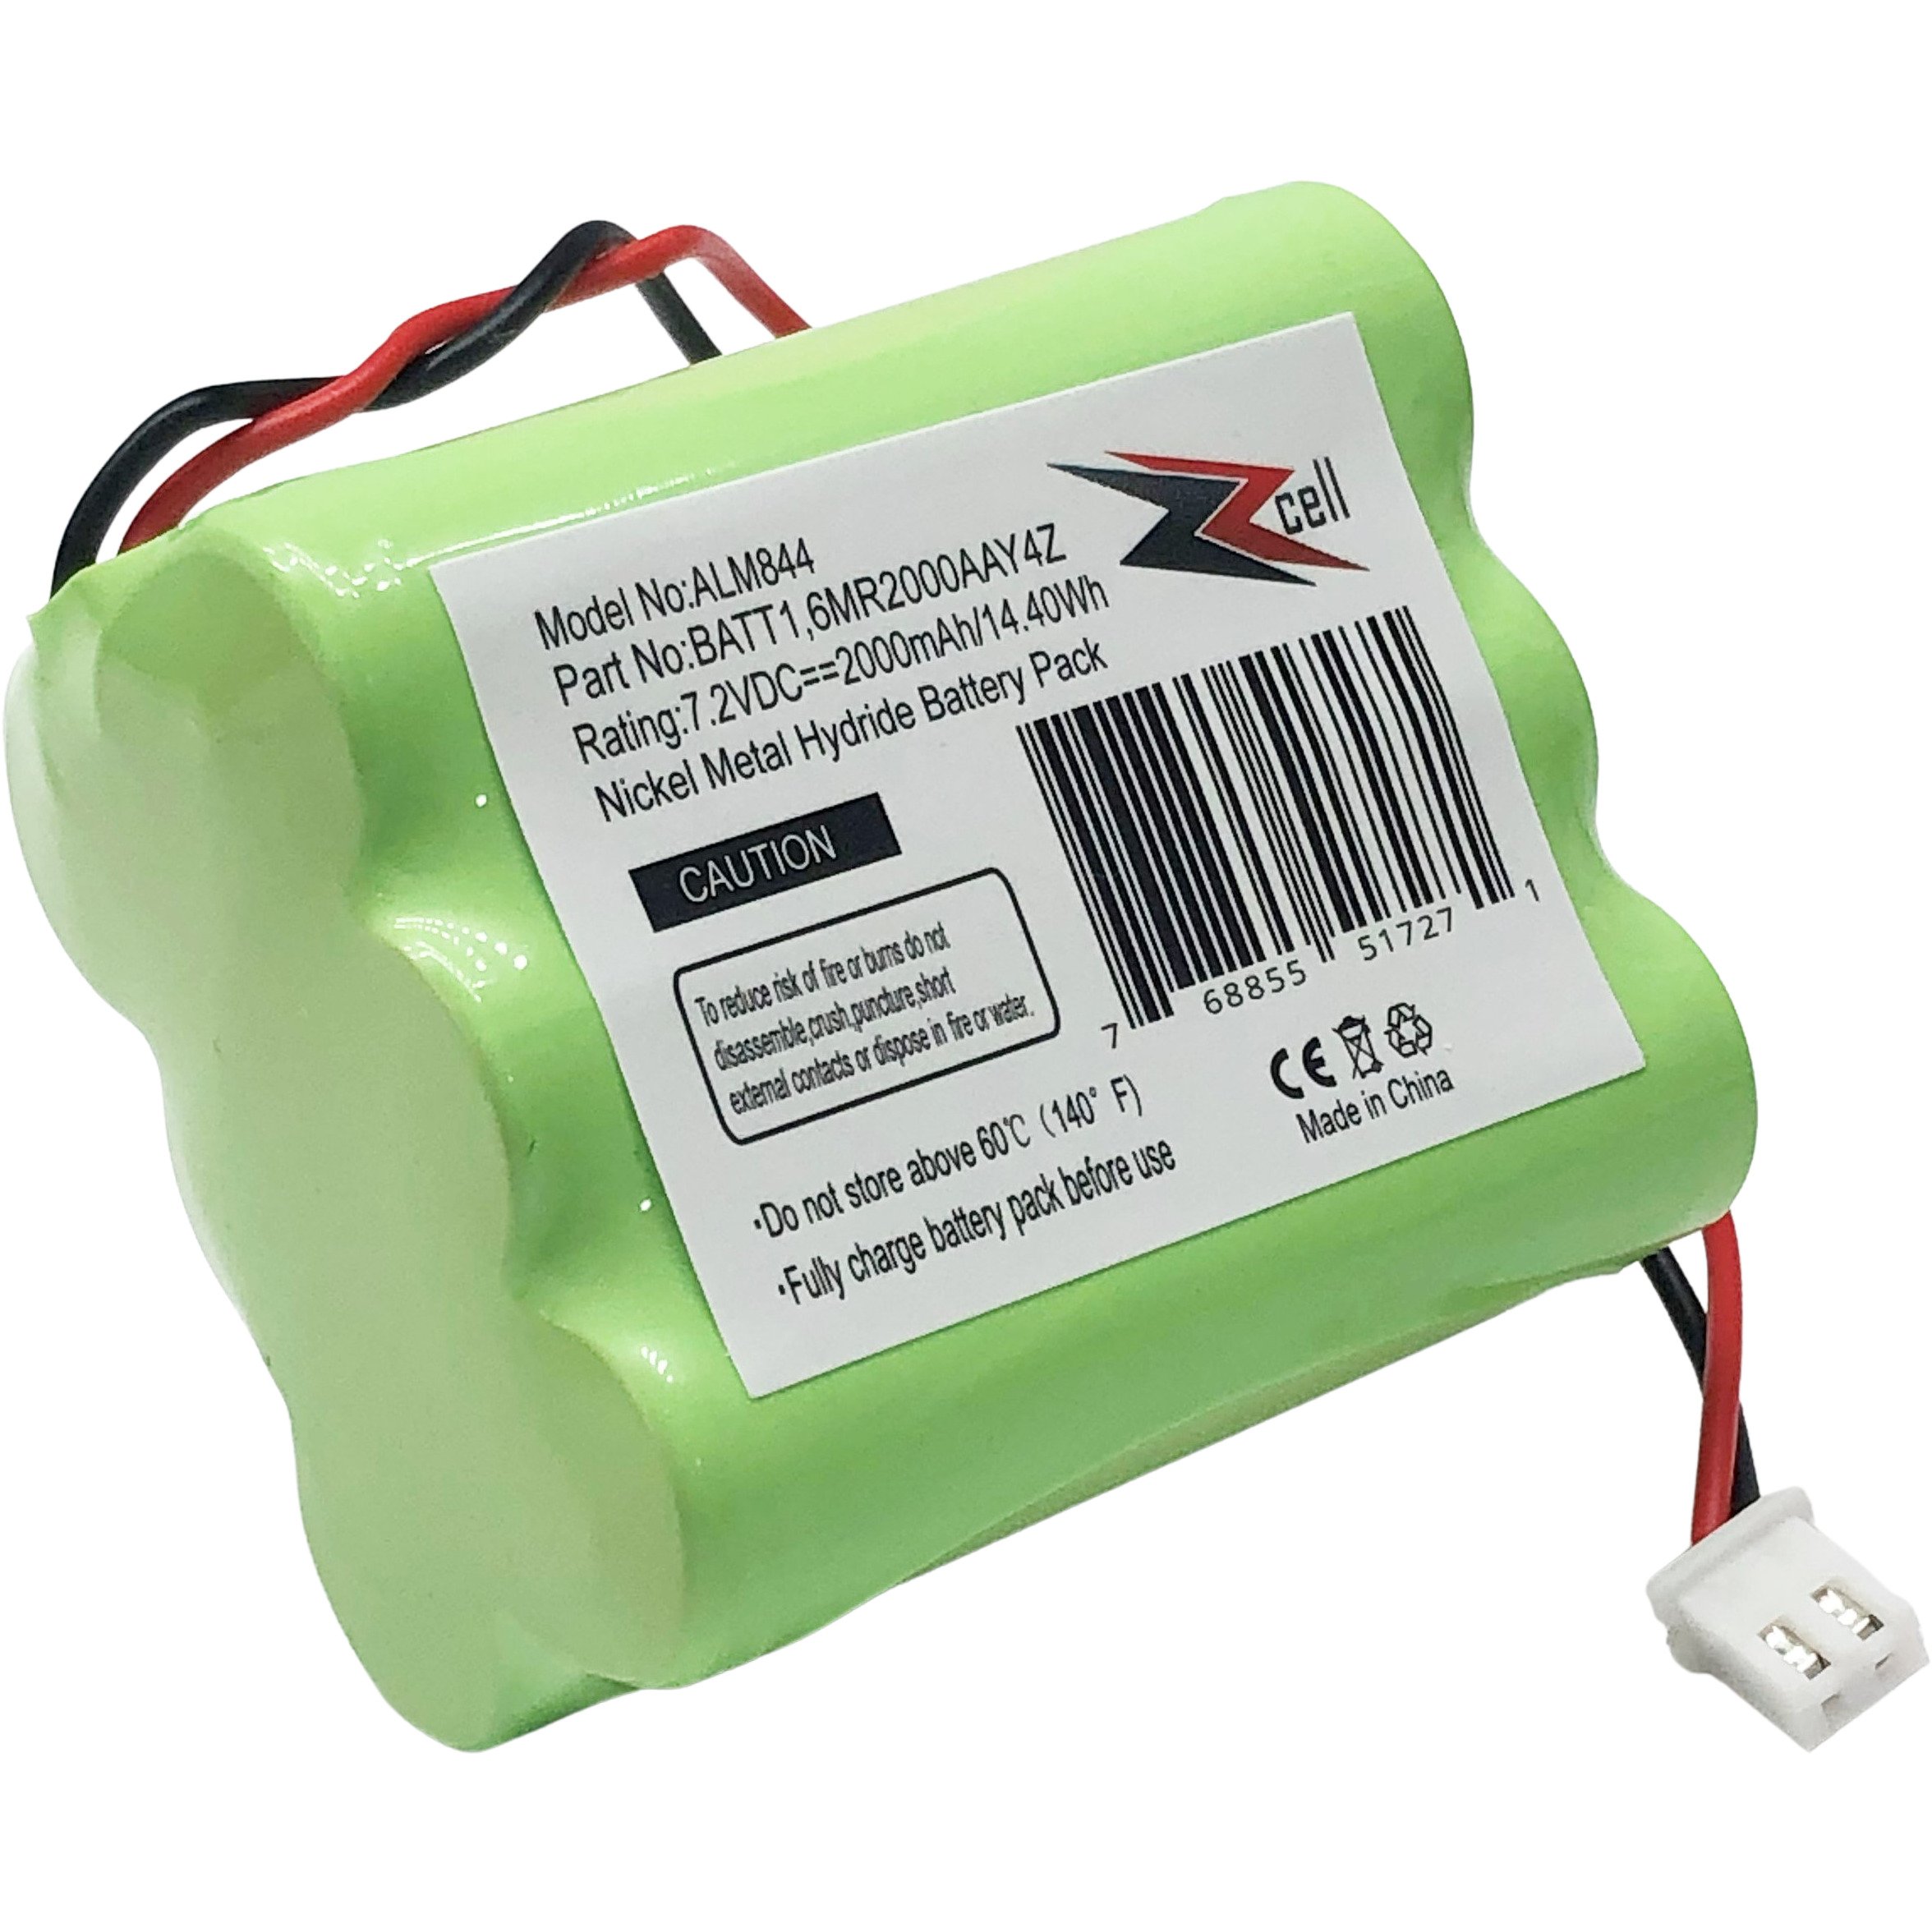 ZZcell Replacement Battery For 2Gig BATT1, BATT1X, BATT2X, 6MR2000AAY4Z, GC2 2GIG-CNTRL2 2GIG-CP2, GCKIT311, 228844, Go Control Panel Alarm System 10-000013-001, PERS-4200 - image 1 of 6